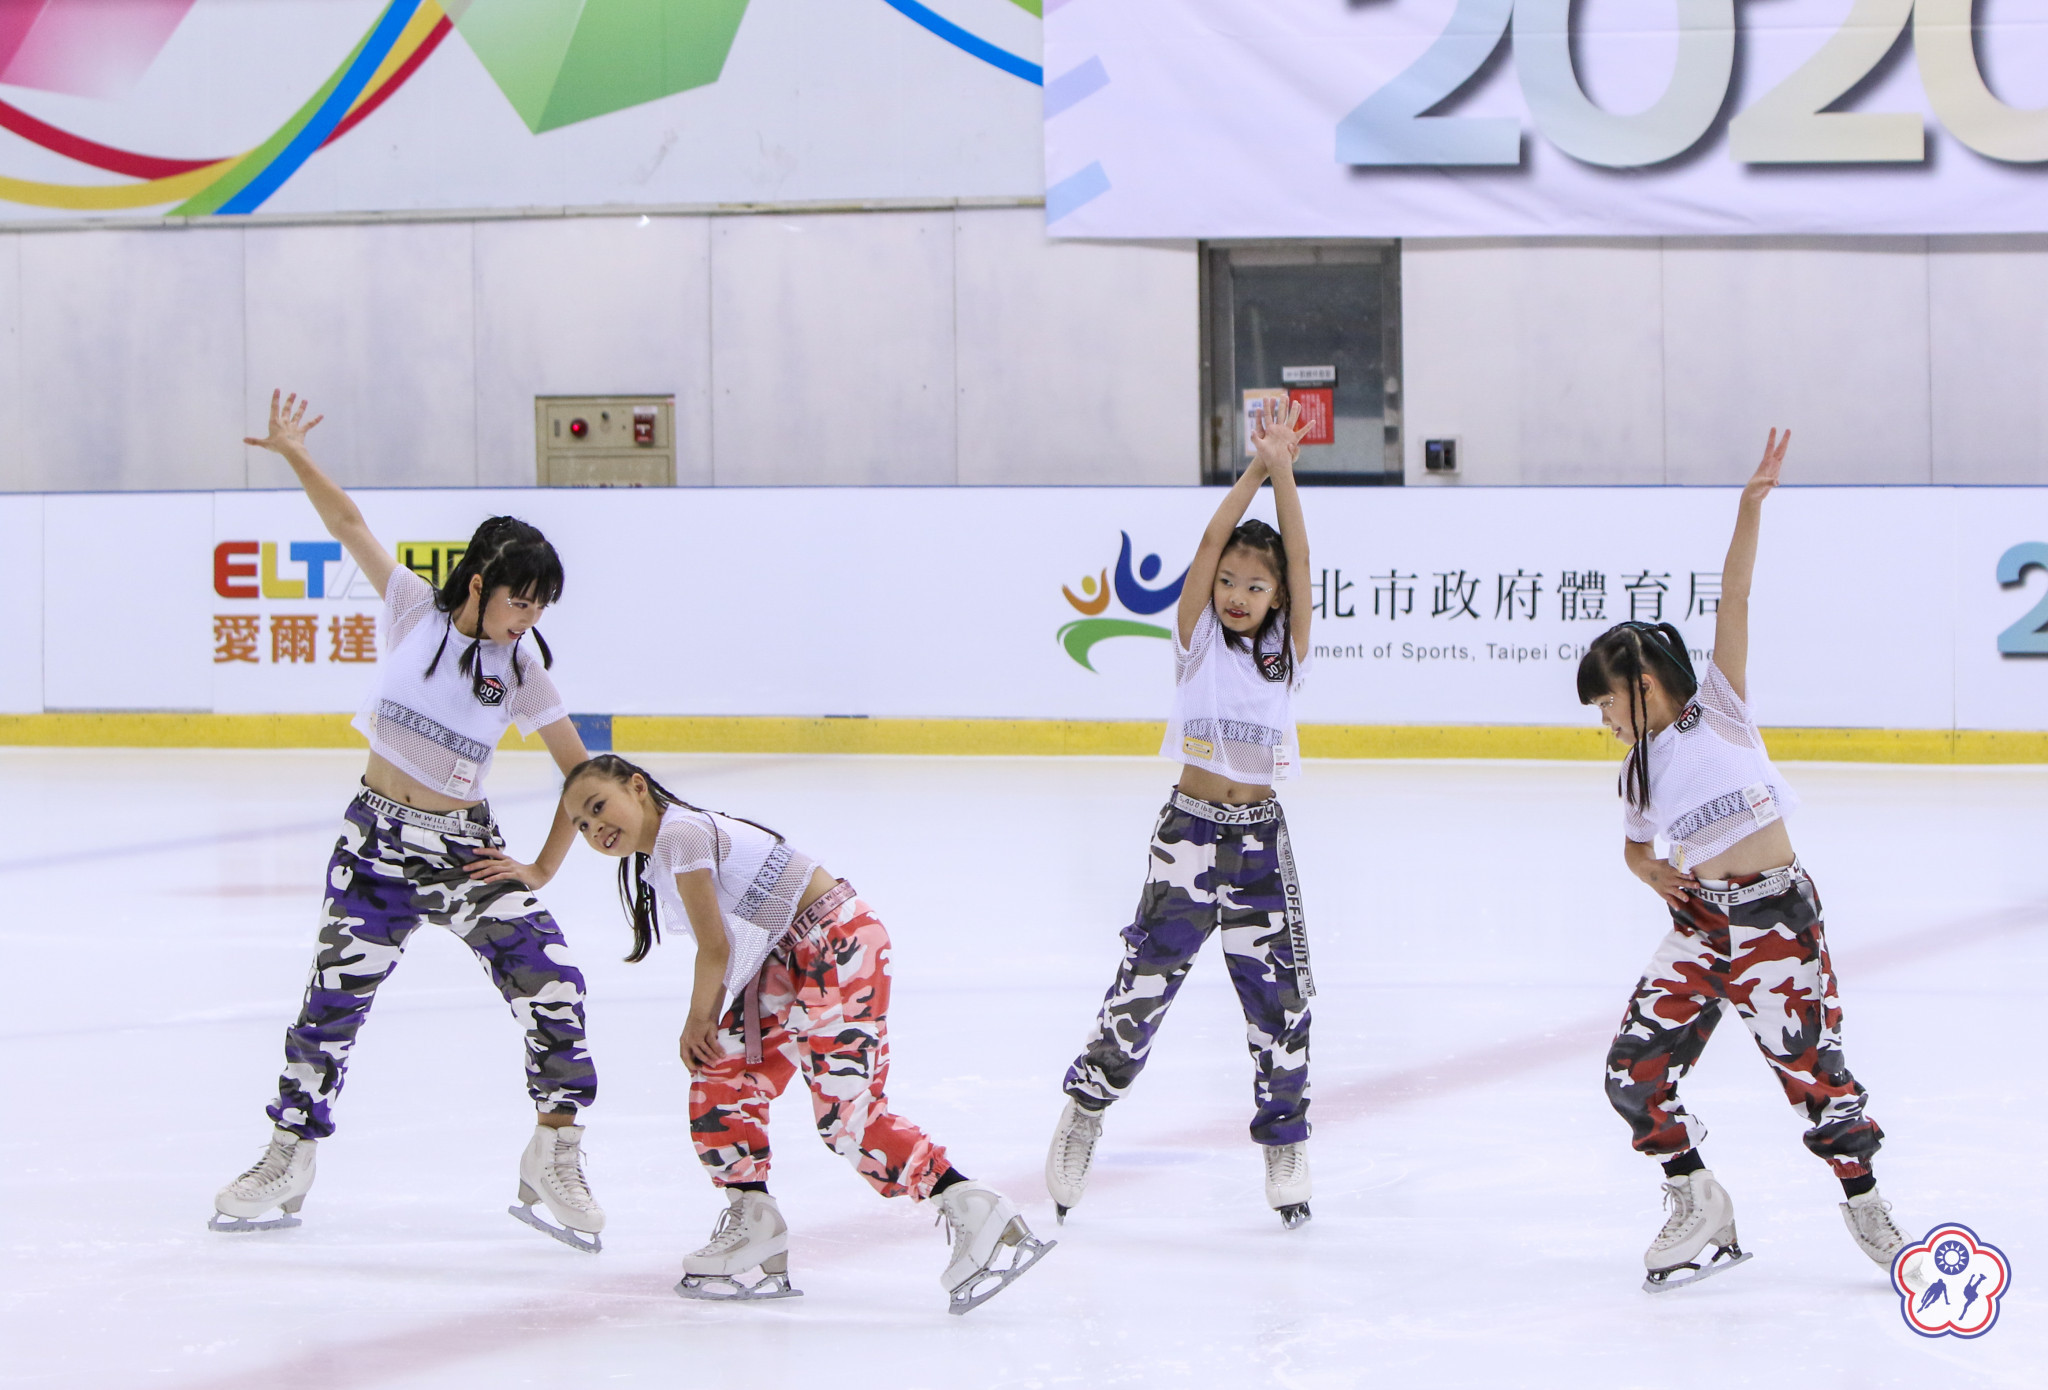 The Chinese Taipei Skating Union hopes its recess programme can help develop the next generation of figure skaters ©CTSU